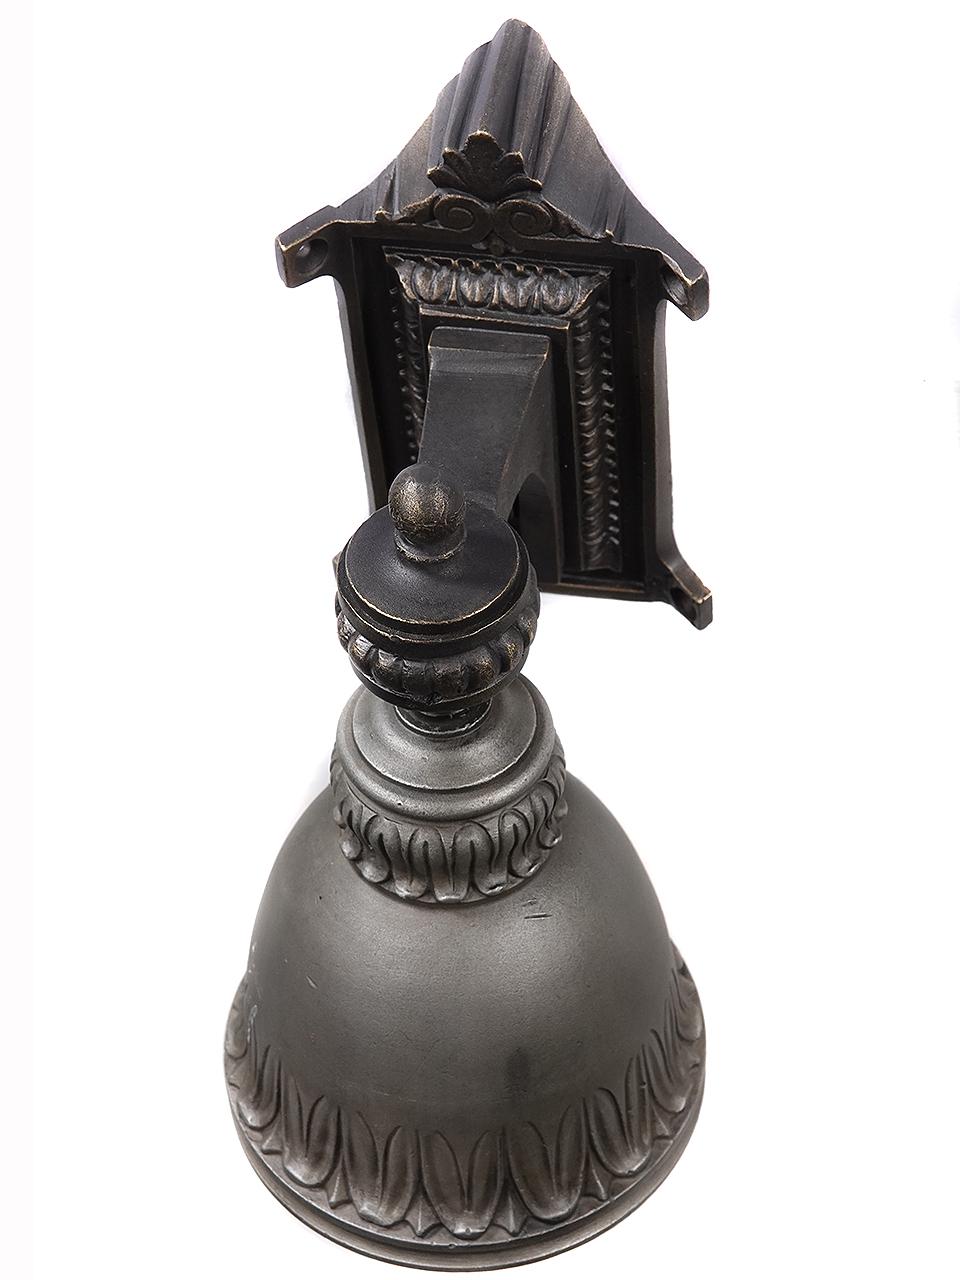 This is a rare gem. You may not see another one. The lamp and wall bracket are designed to fit into the corner of a room or cabinet. The shade hangs from an articulated ball fitting and the inside has a shiny white porcelain lining. As with all RR